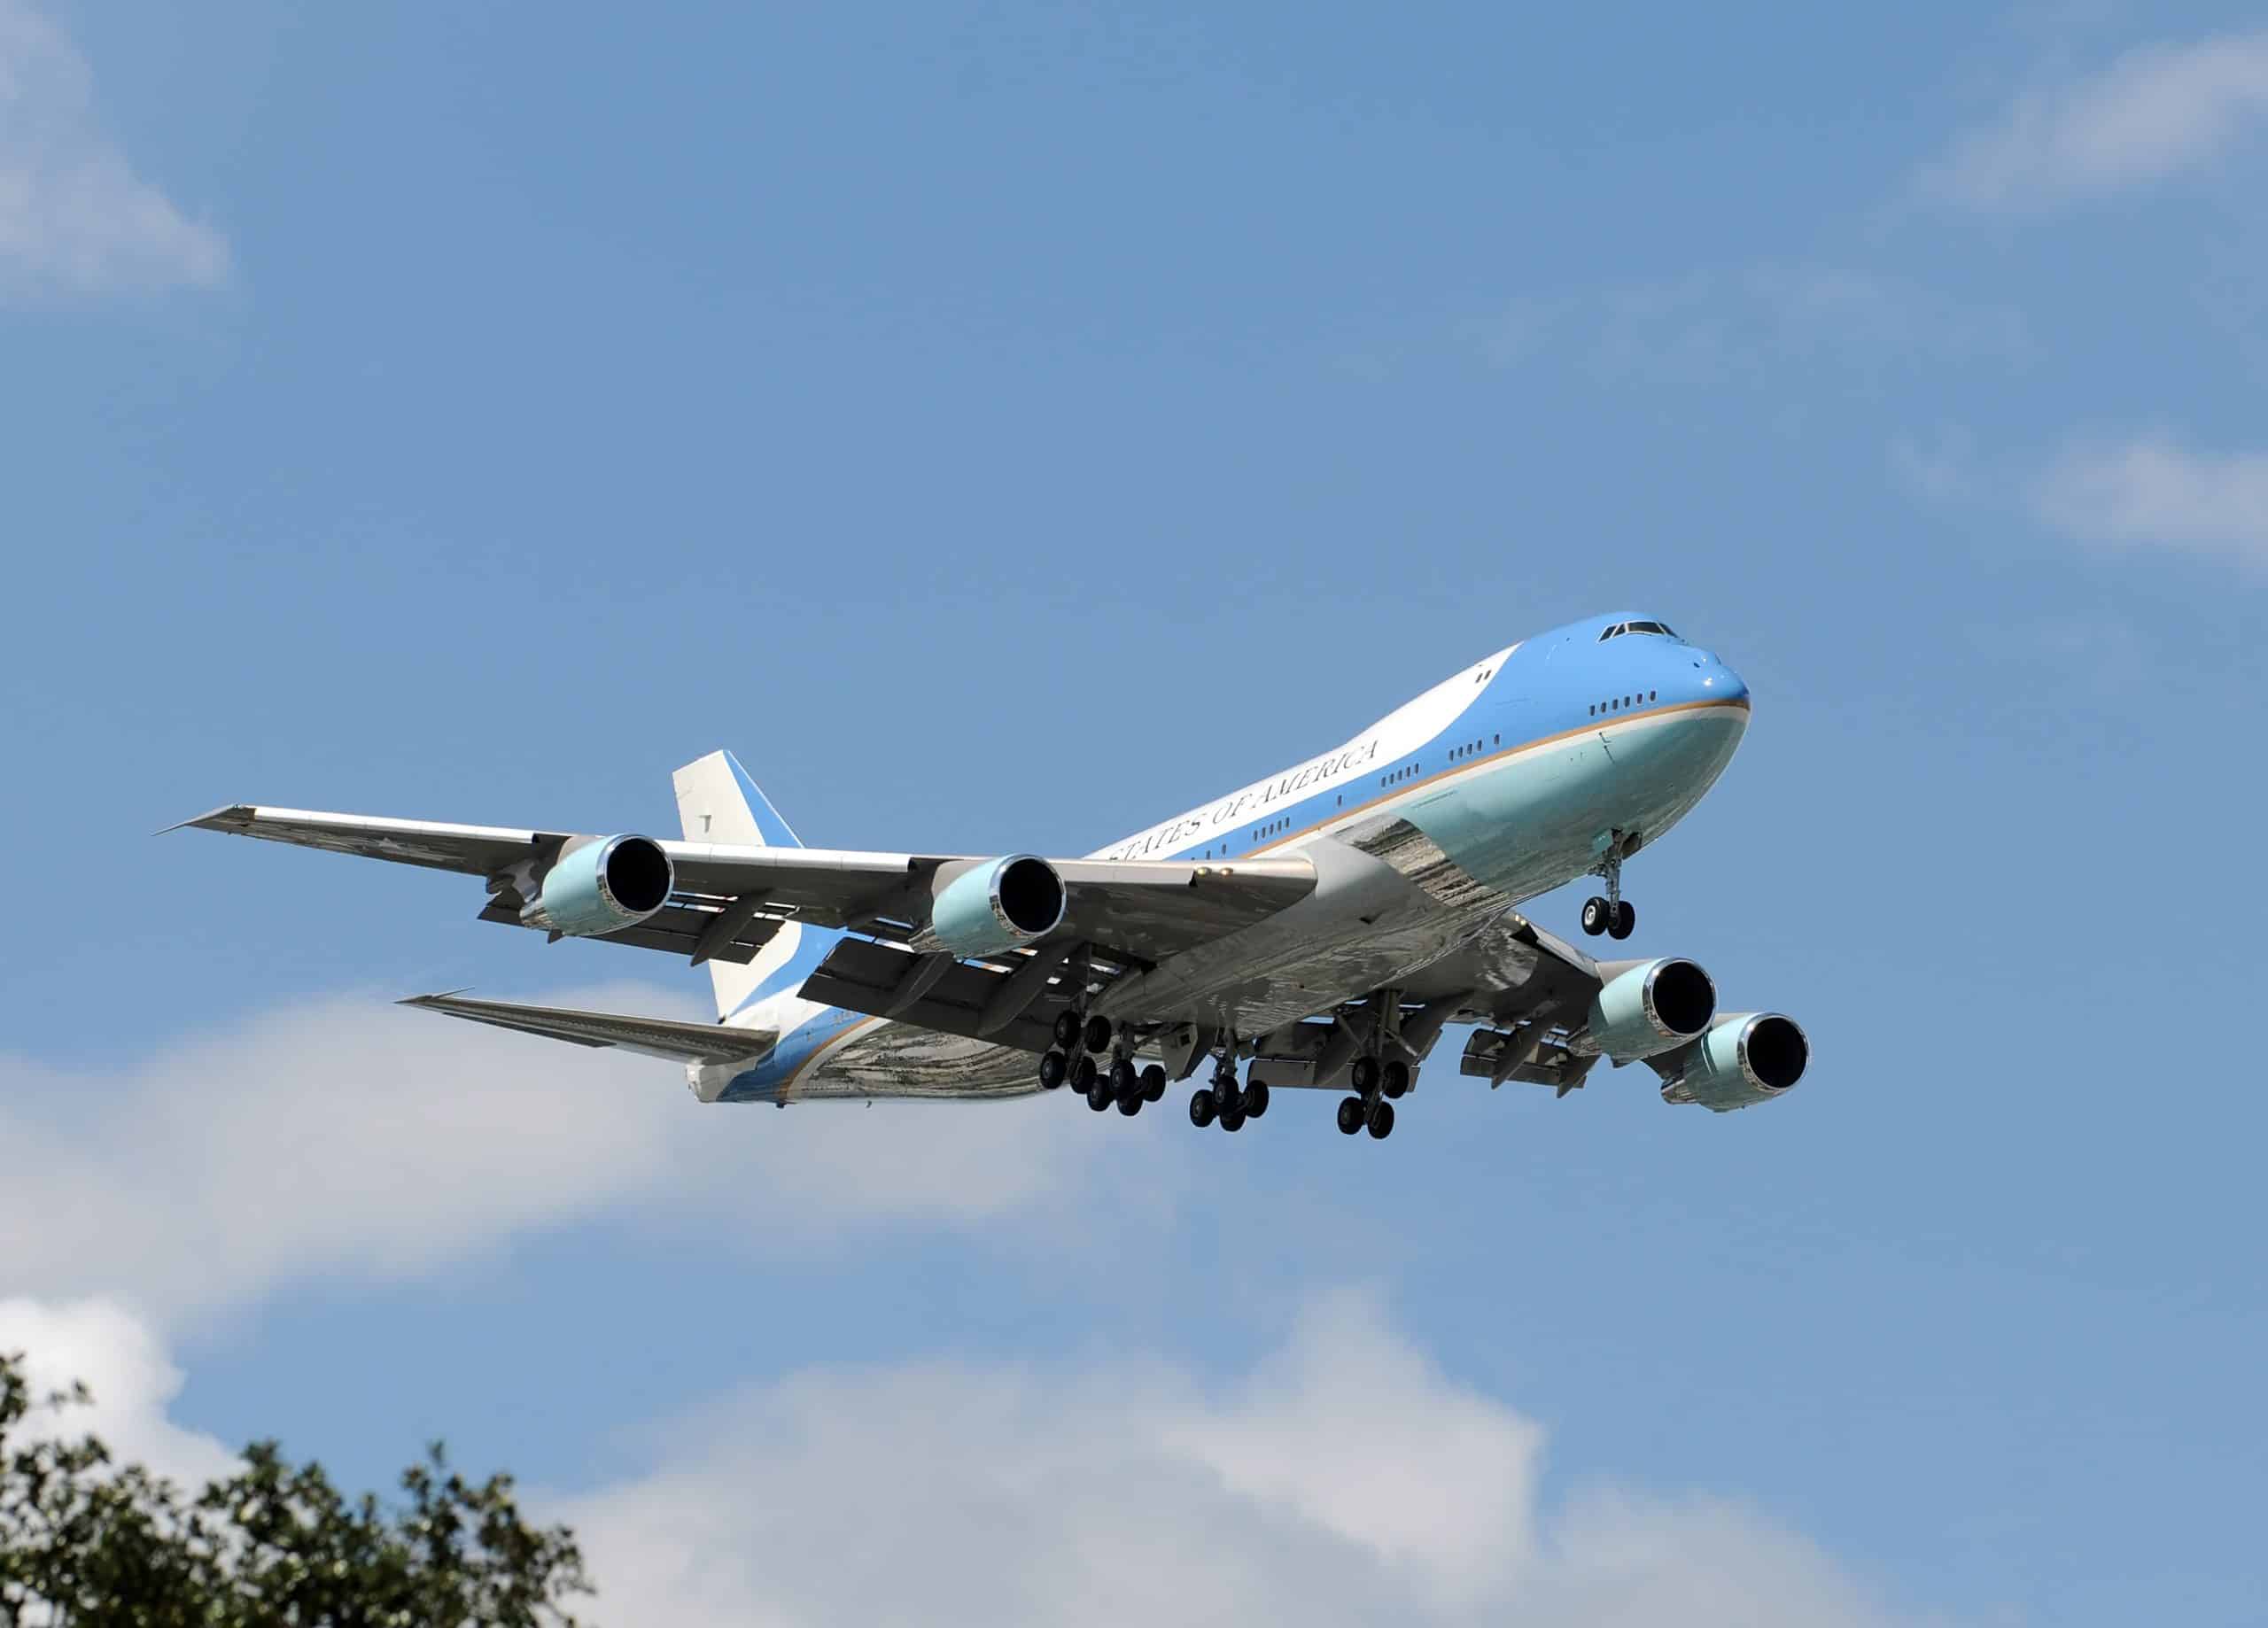 US Air Force One on final approach, representing one of the most expensive private jets in operation, as it carries the President with unmatched security, luxury, and technology